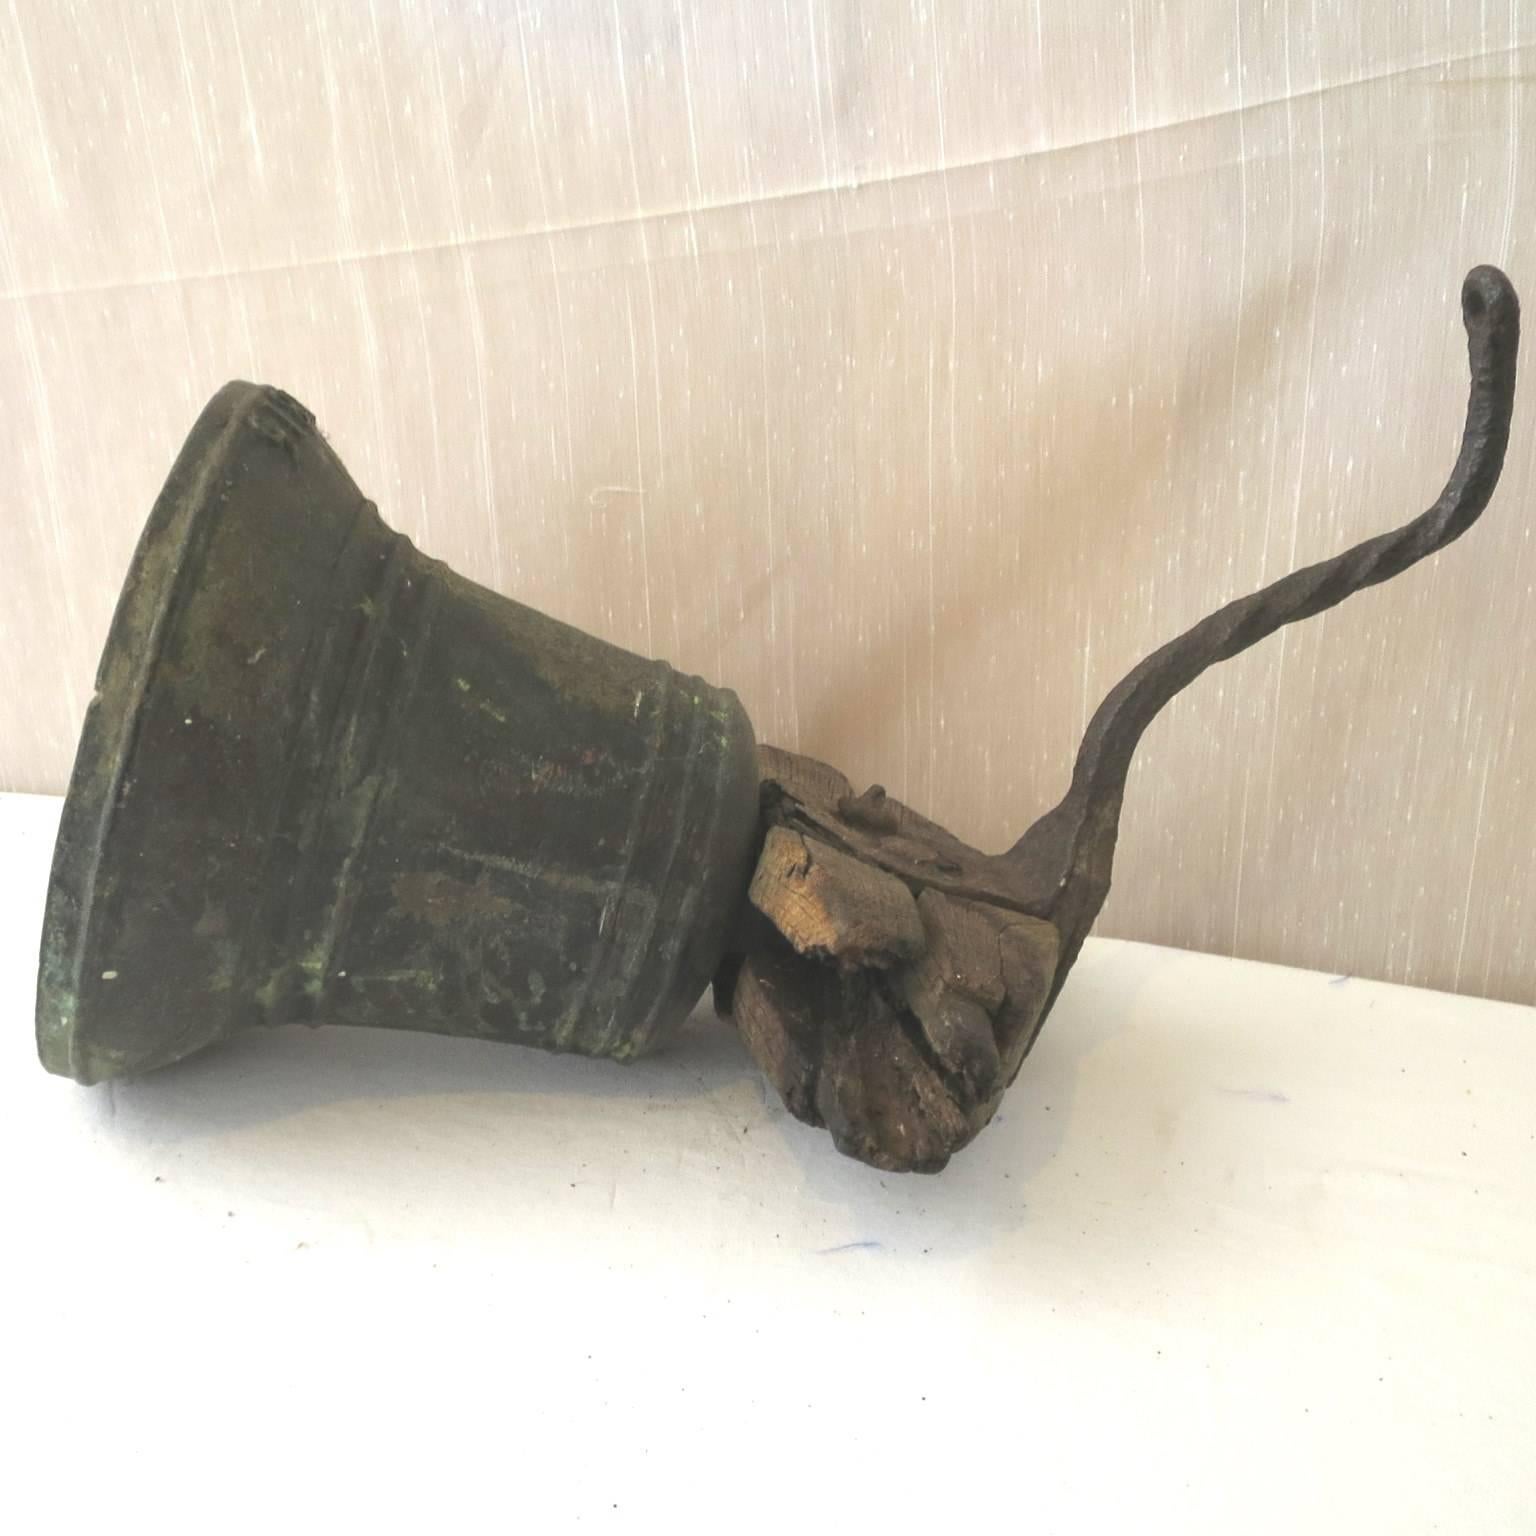 The bronze Airin bell dated 1815 is attached to its wood beam with its wrought iron mounts.
The bell clapper is lacking.
The dimensions of the bell is 11.50 diameter 11